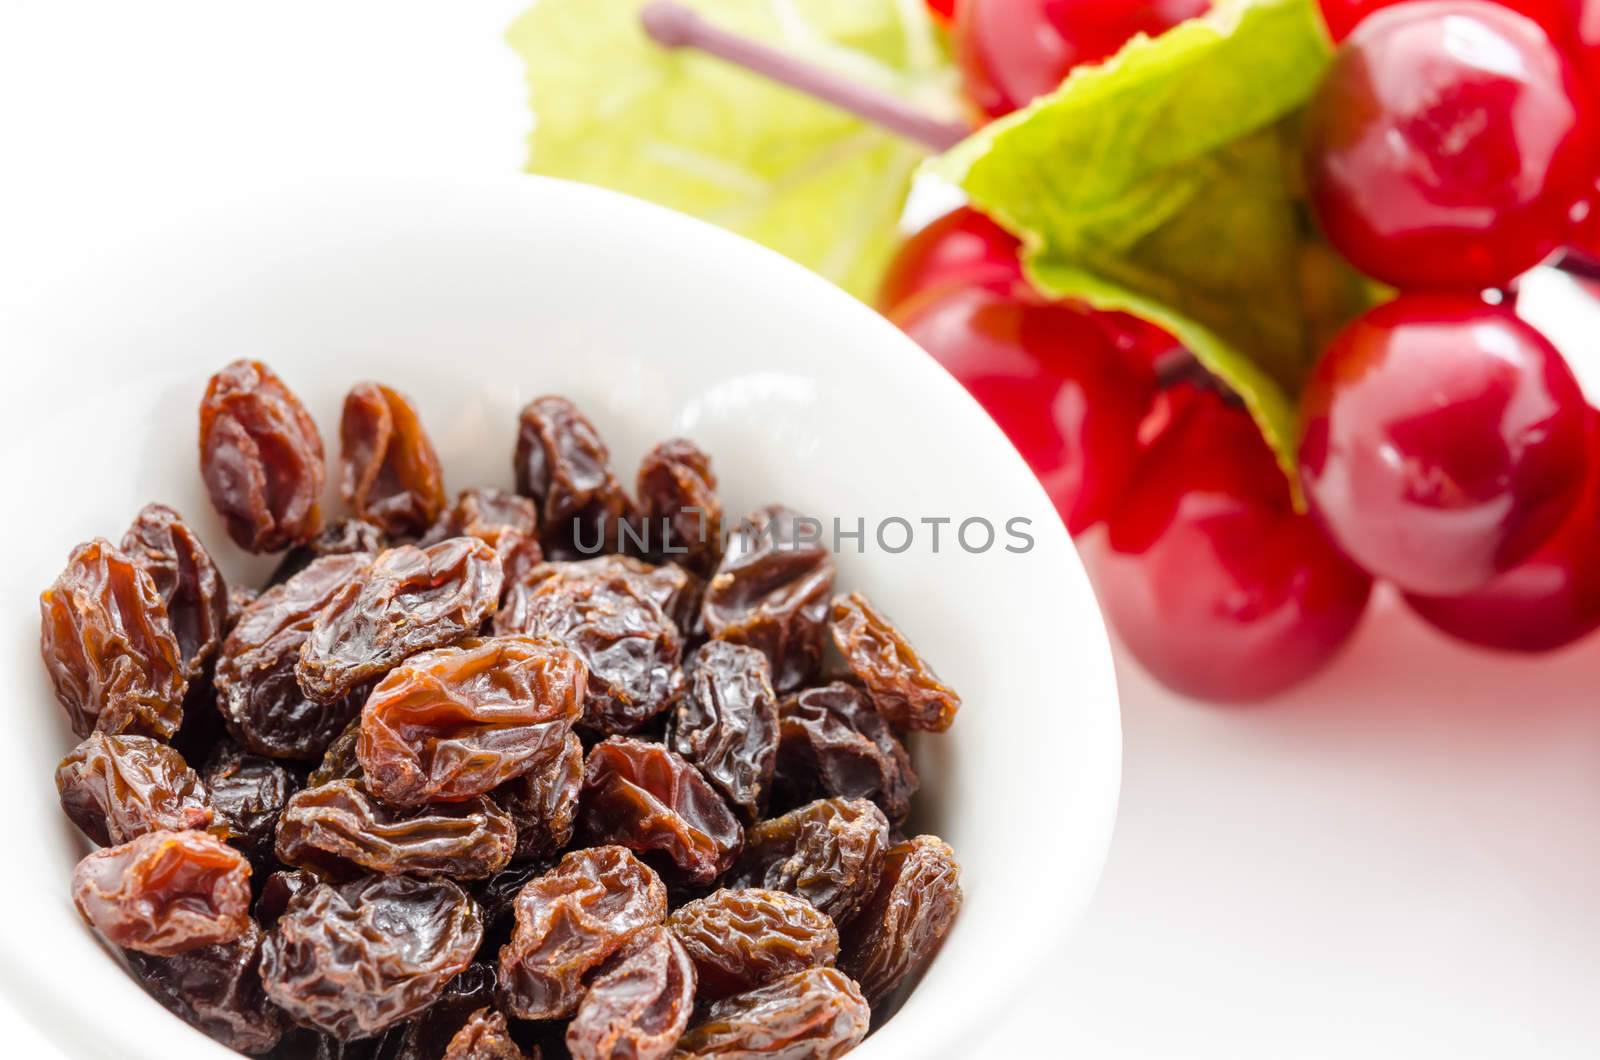 Raisins in bowl with red grapes. by Gamjai